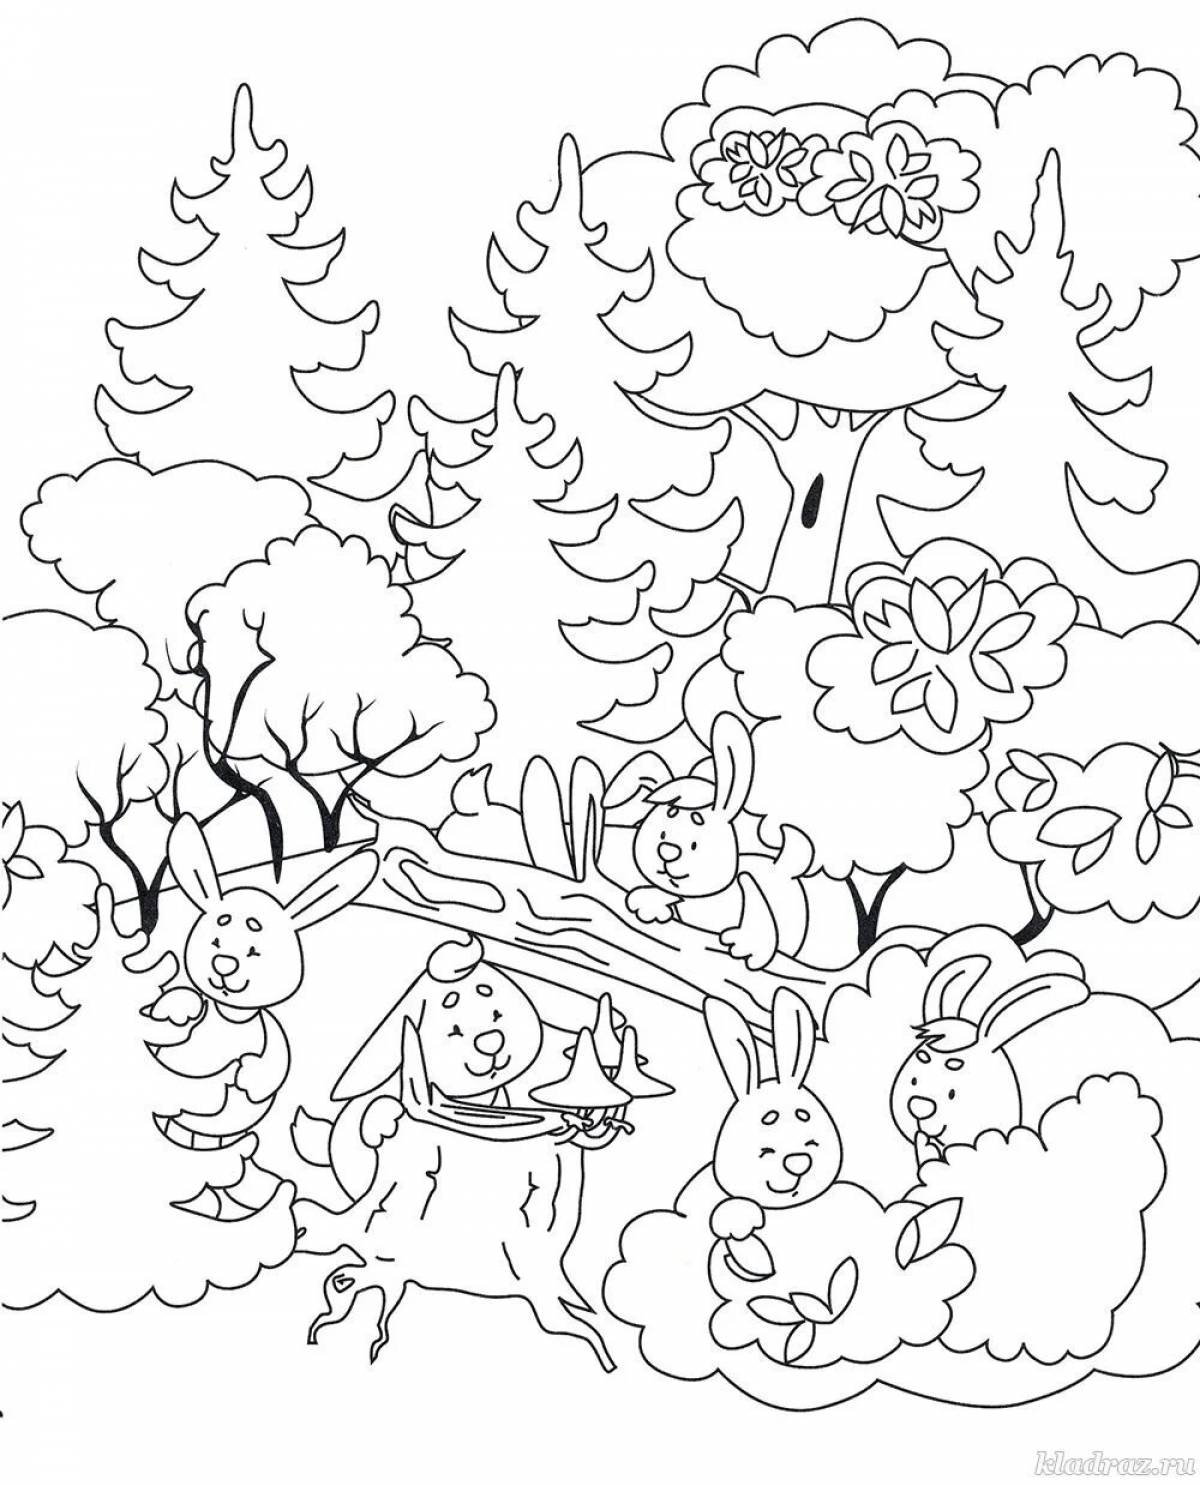 Coloring book exciting forest glade